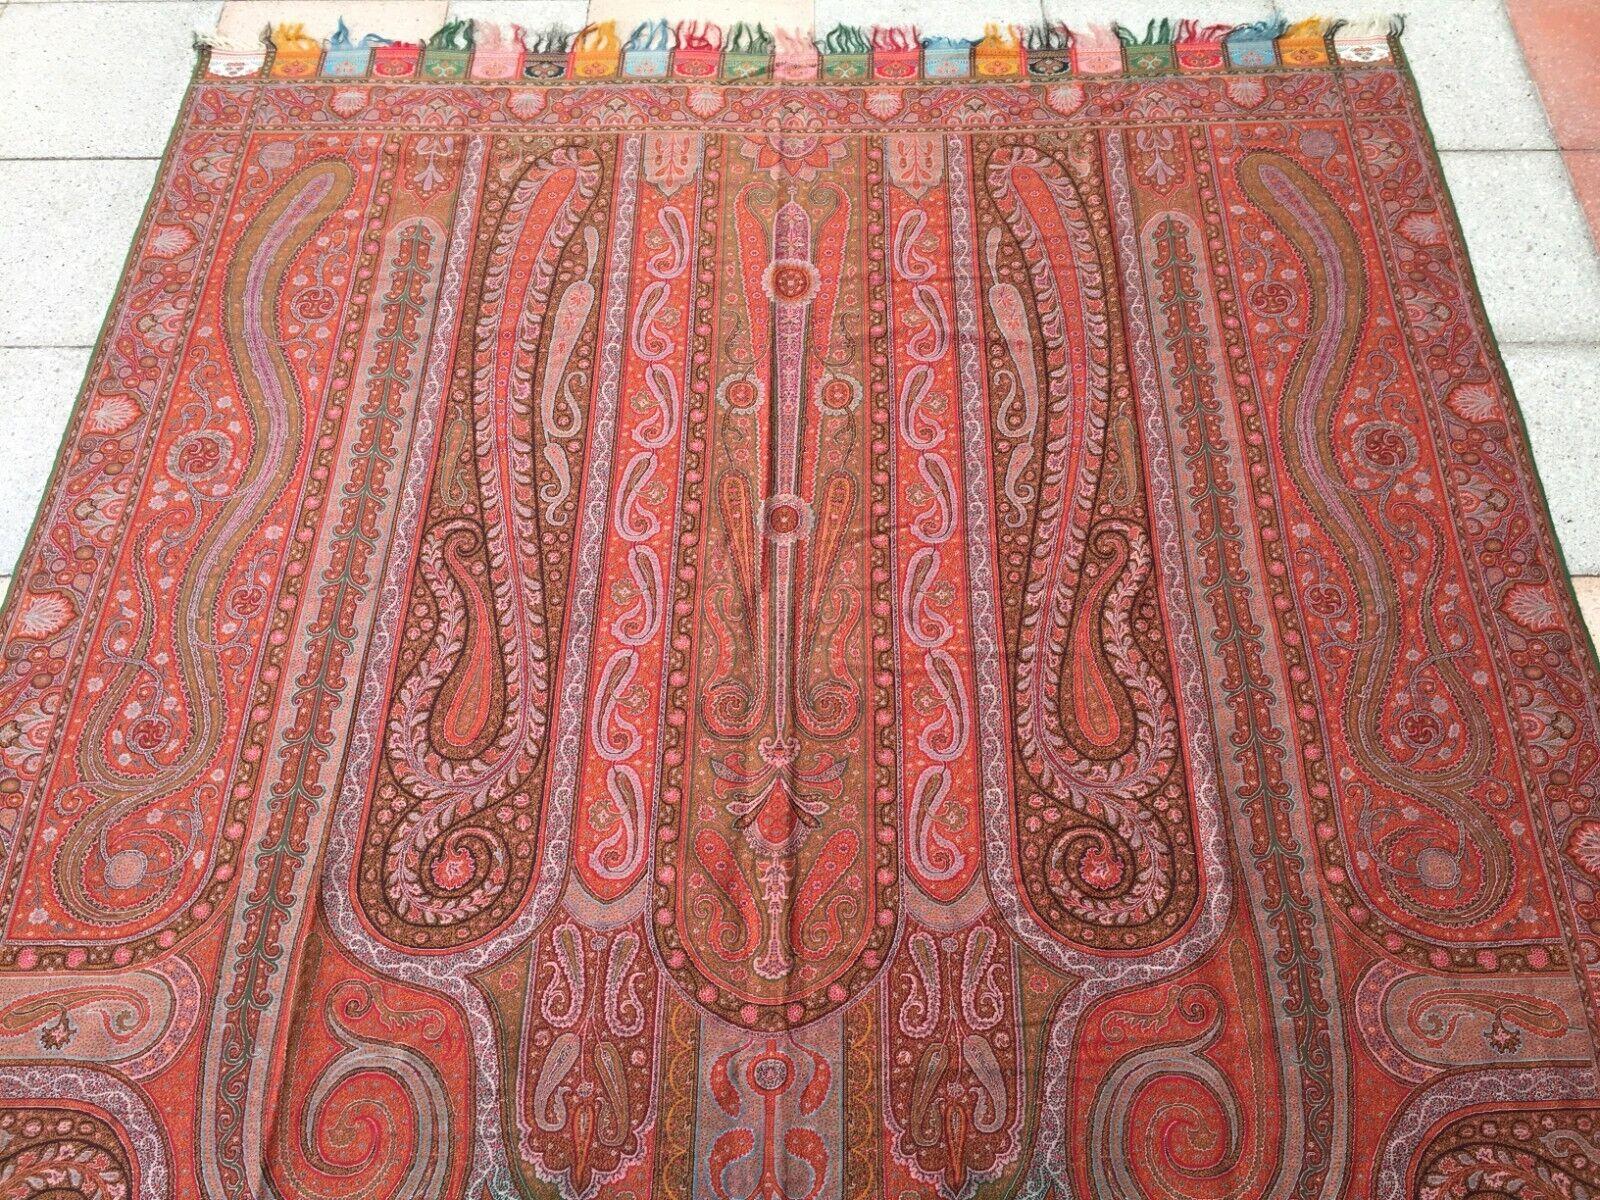 Handmade Antique Indian Cashmere Shawl 5.2' x 10.9', 1900s - 1W01 For Sale 2